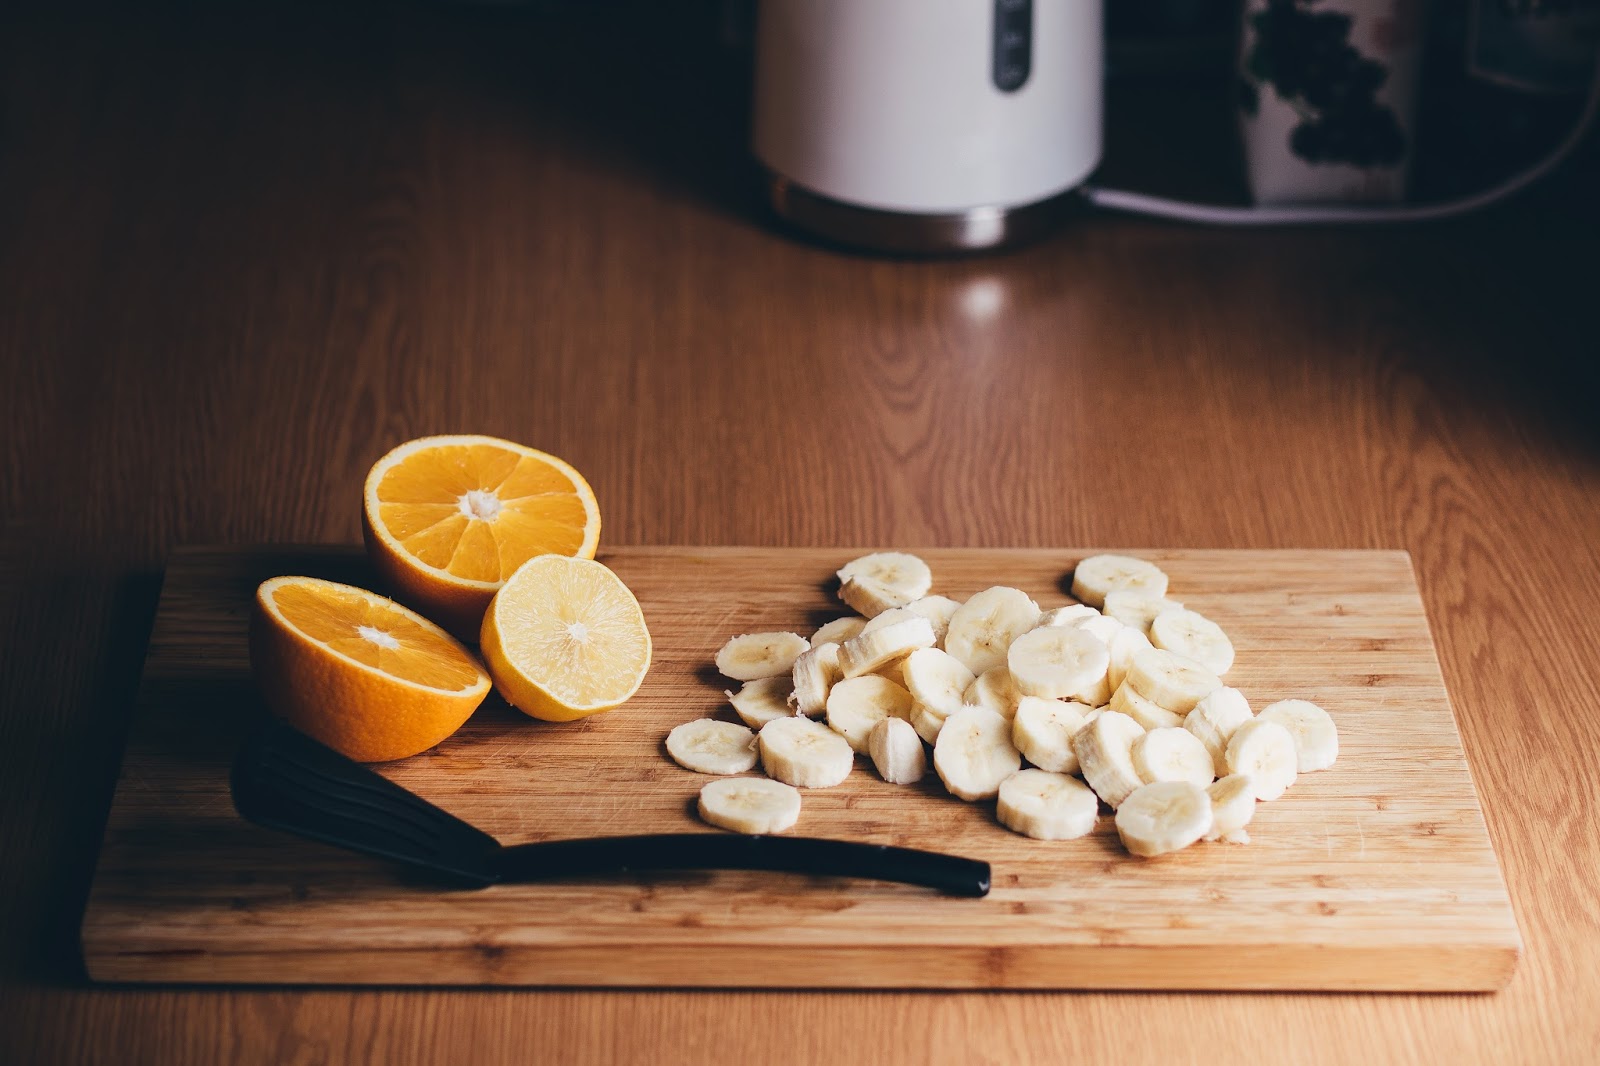 Image showing a chopping board with oranges and lemons to illustrate an article on blog Is This Mutton? about how women over the age of 40 can safeguard themselves from heart disease